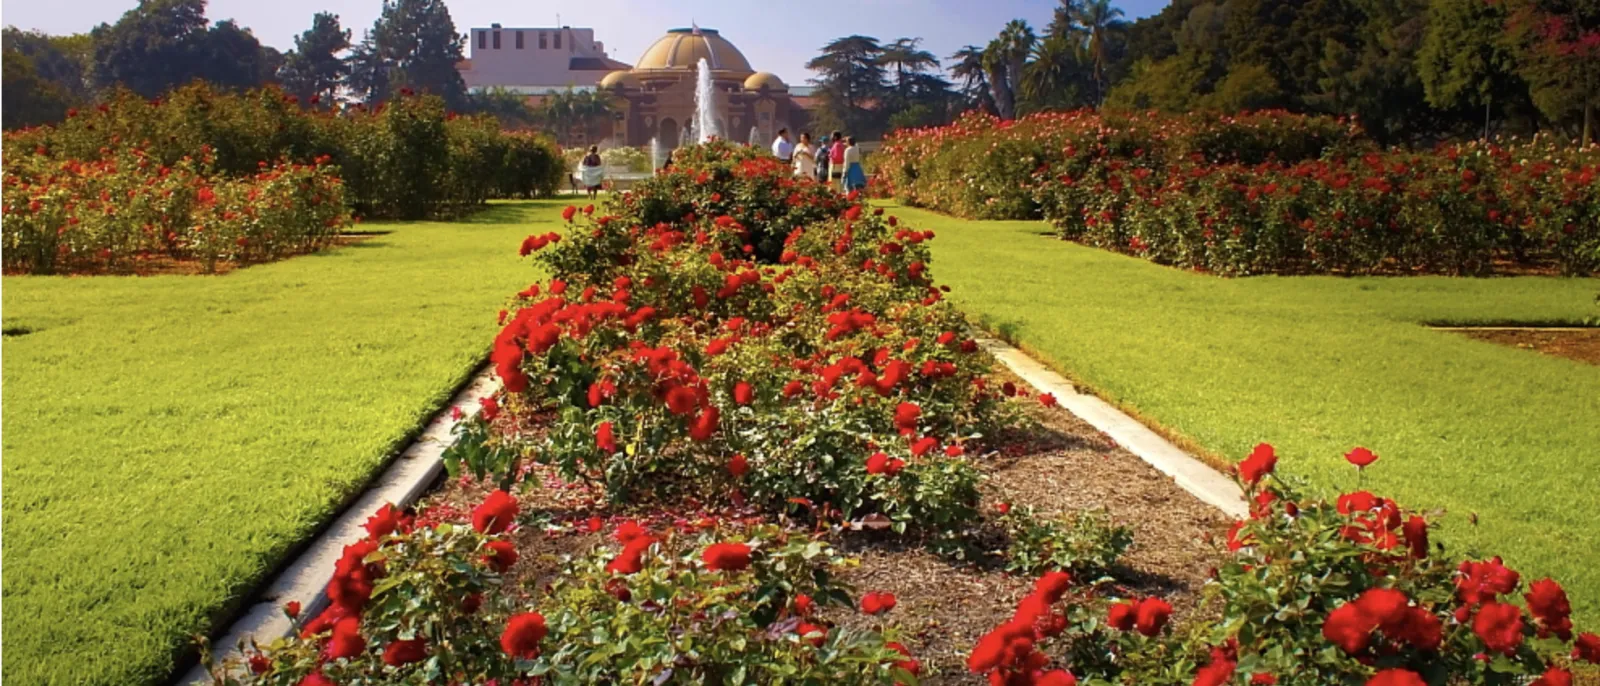 explore the beautiful gardens of los angeles | discover los angeles